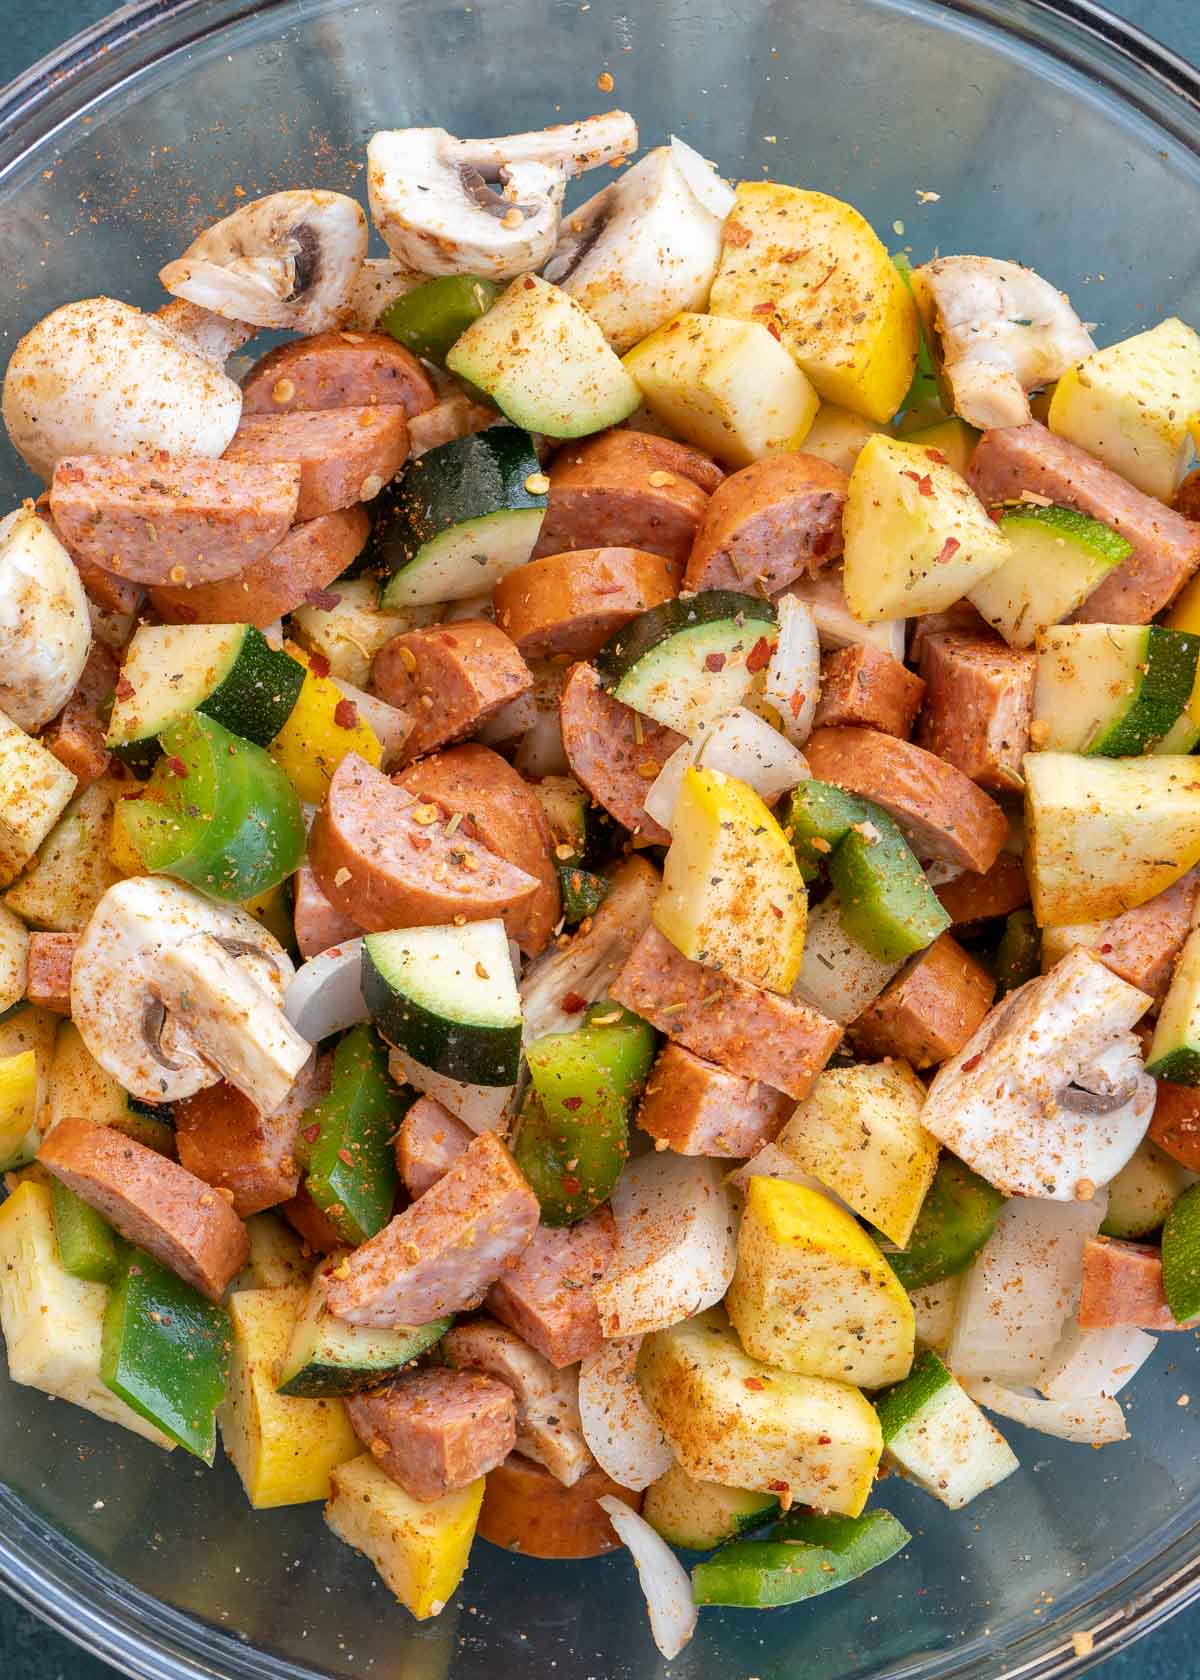 Seasoned sausage and veggies in clear mixing bowl